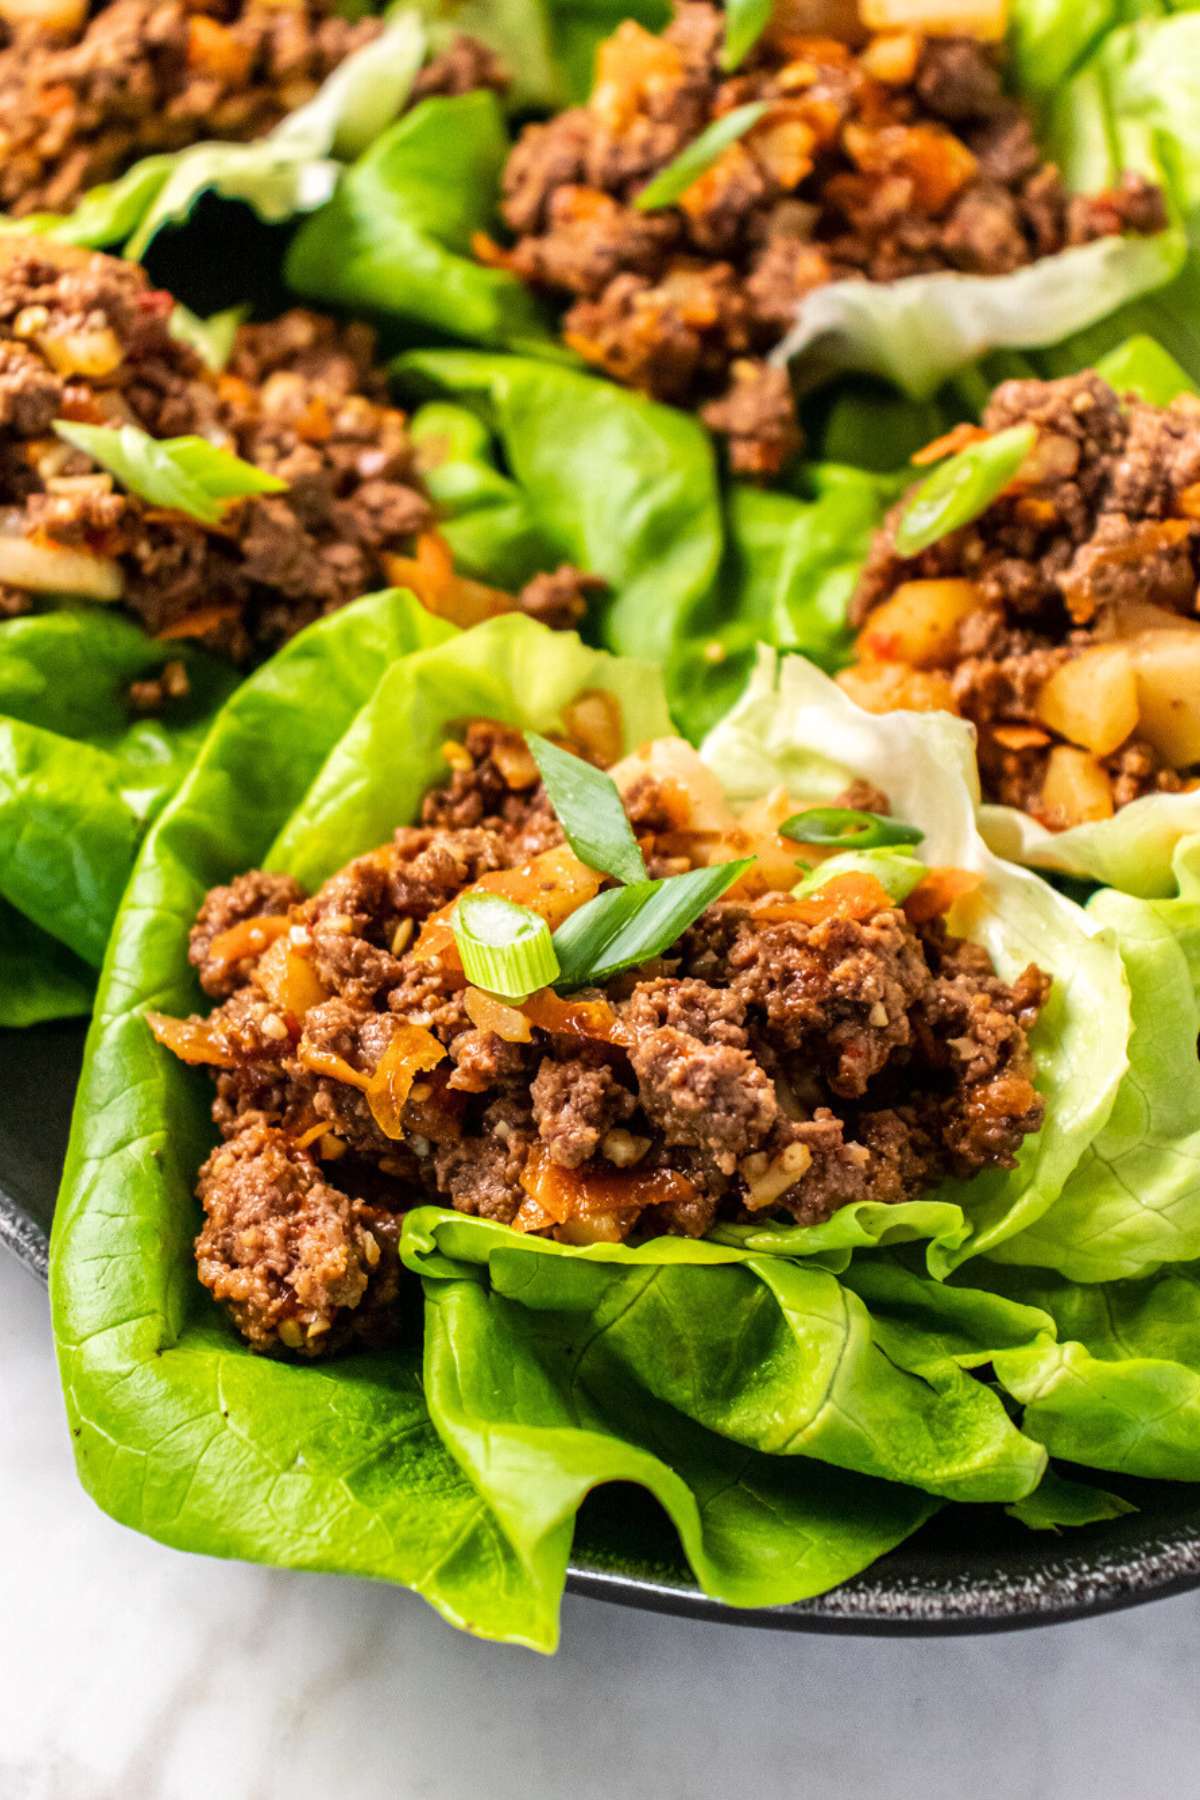 A lettuce wraps ground beef in it and green onions on top.